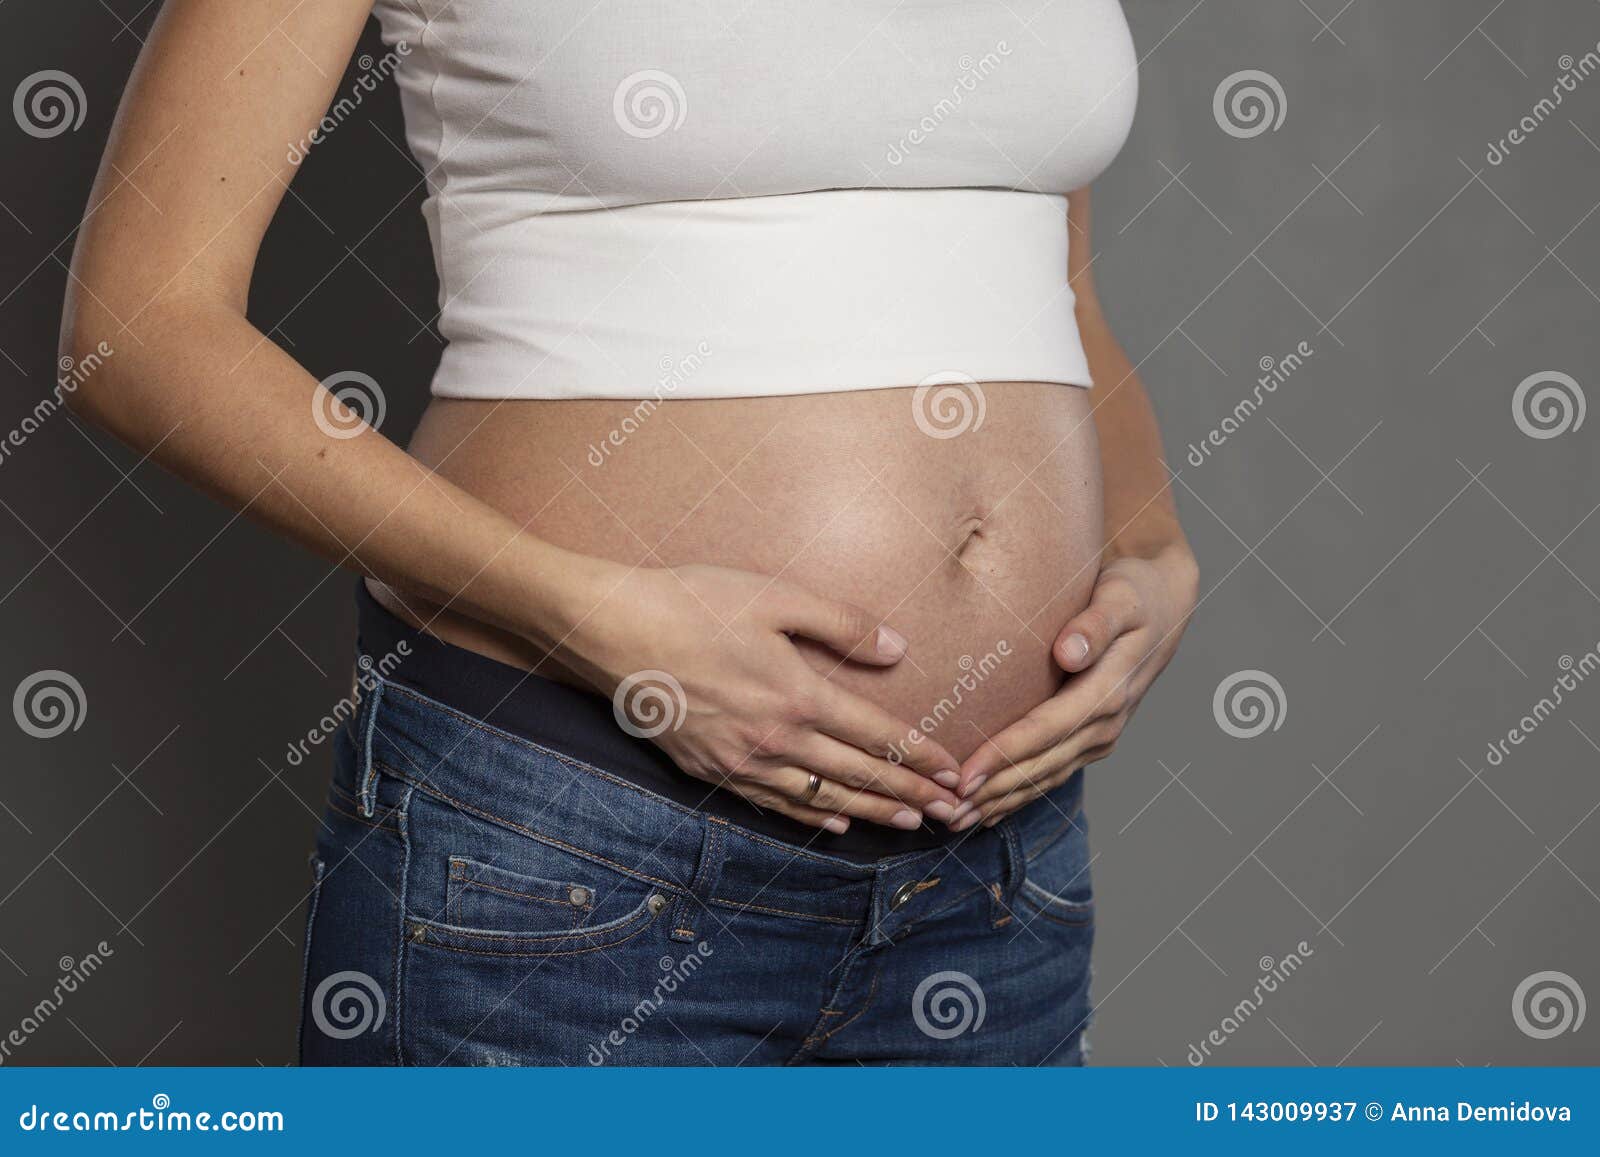 6 Months Pregnant Belly With Girl Blackmores Pregnancy